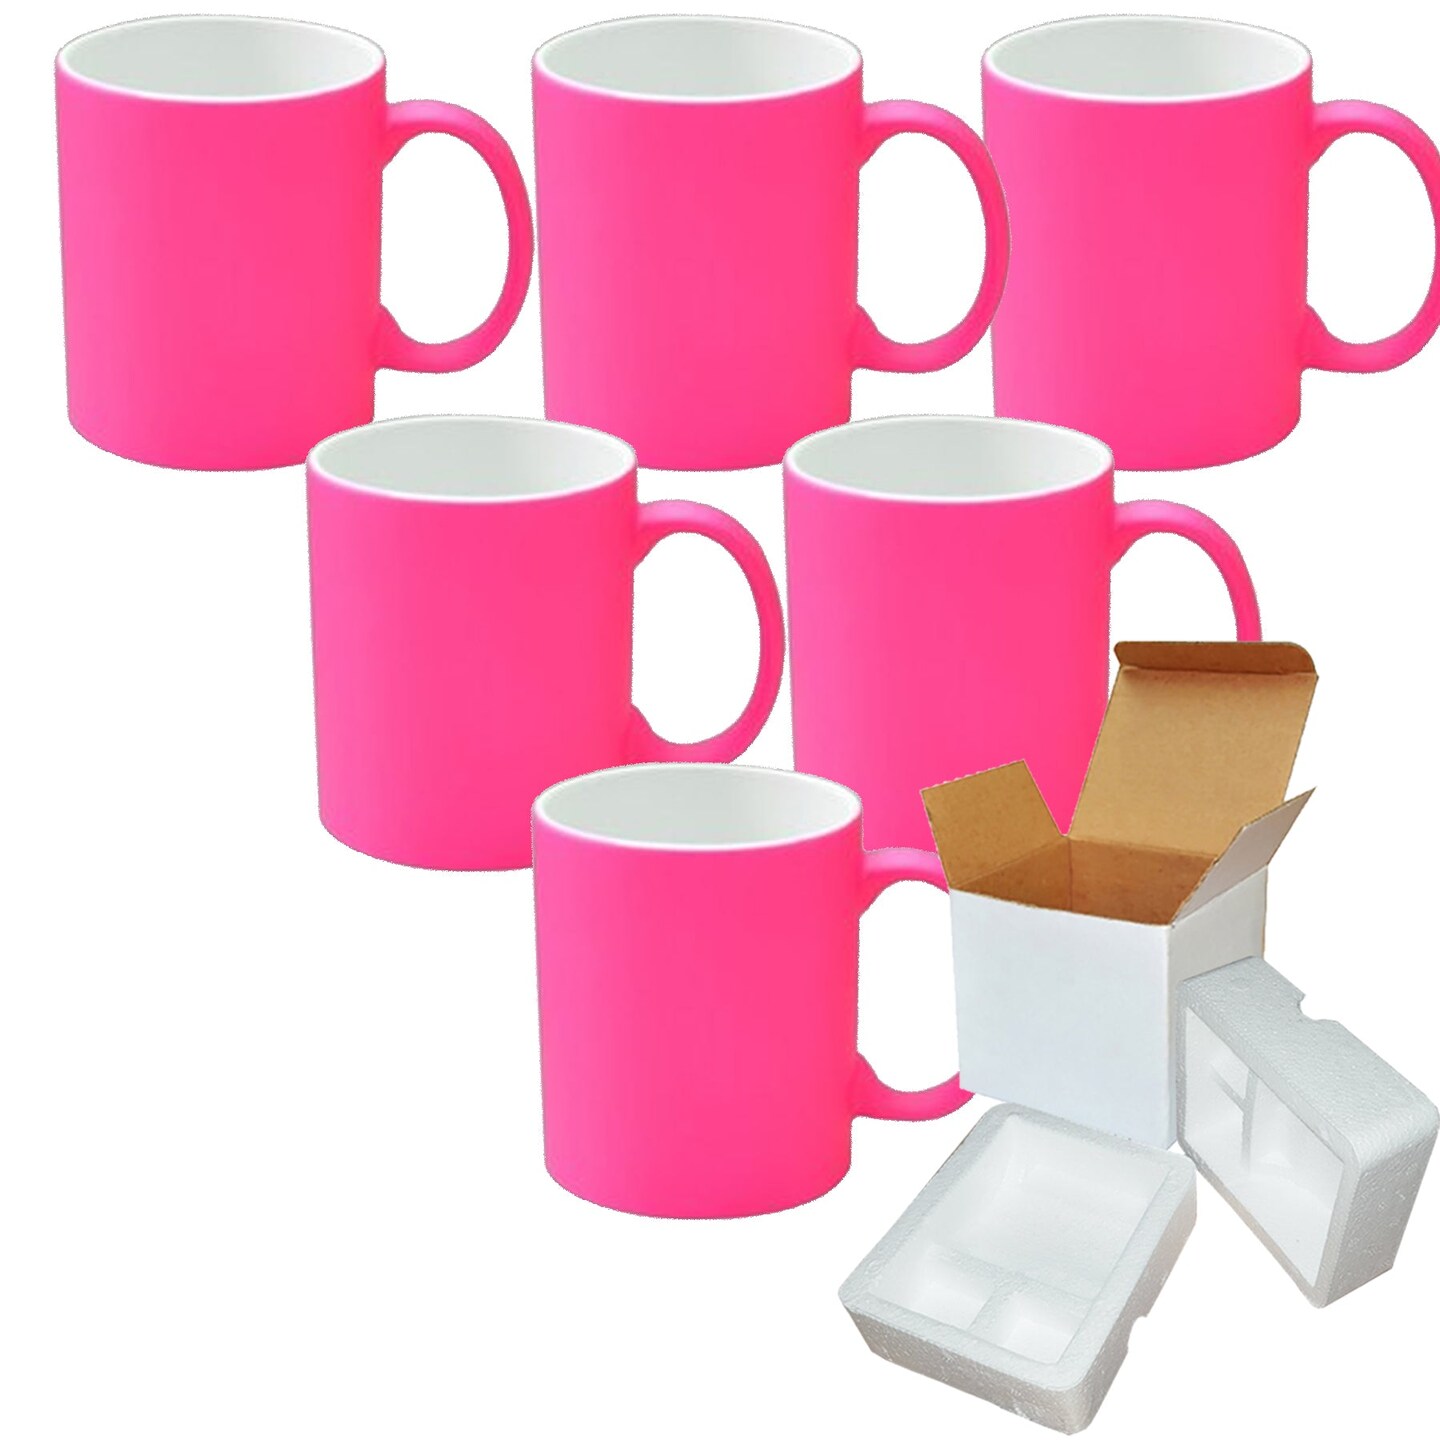 6 PACK 11OZ PINK Fluorescent / Neon Sublimation Mugs with Foam Supports  Cardboard Boxes